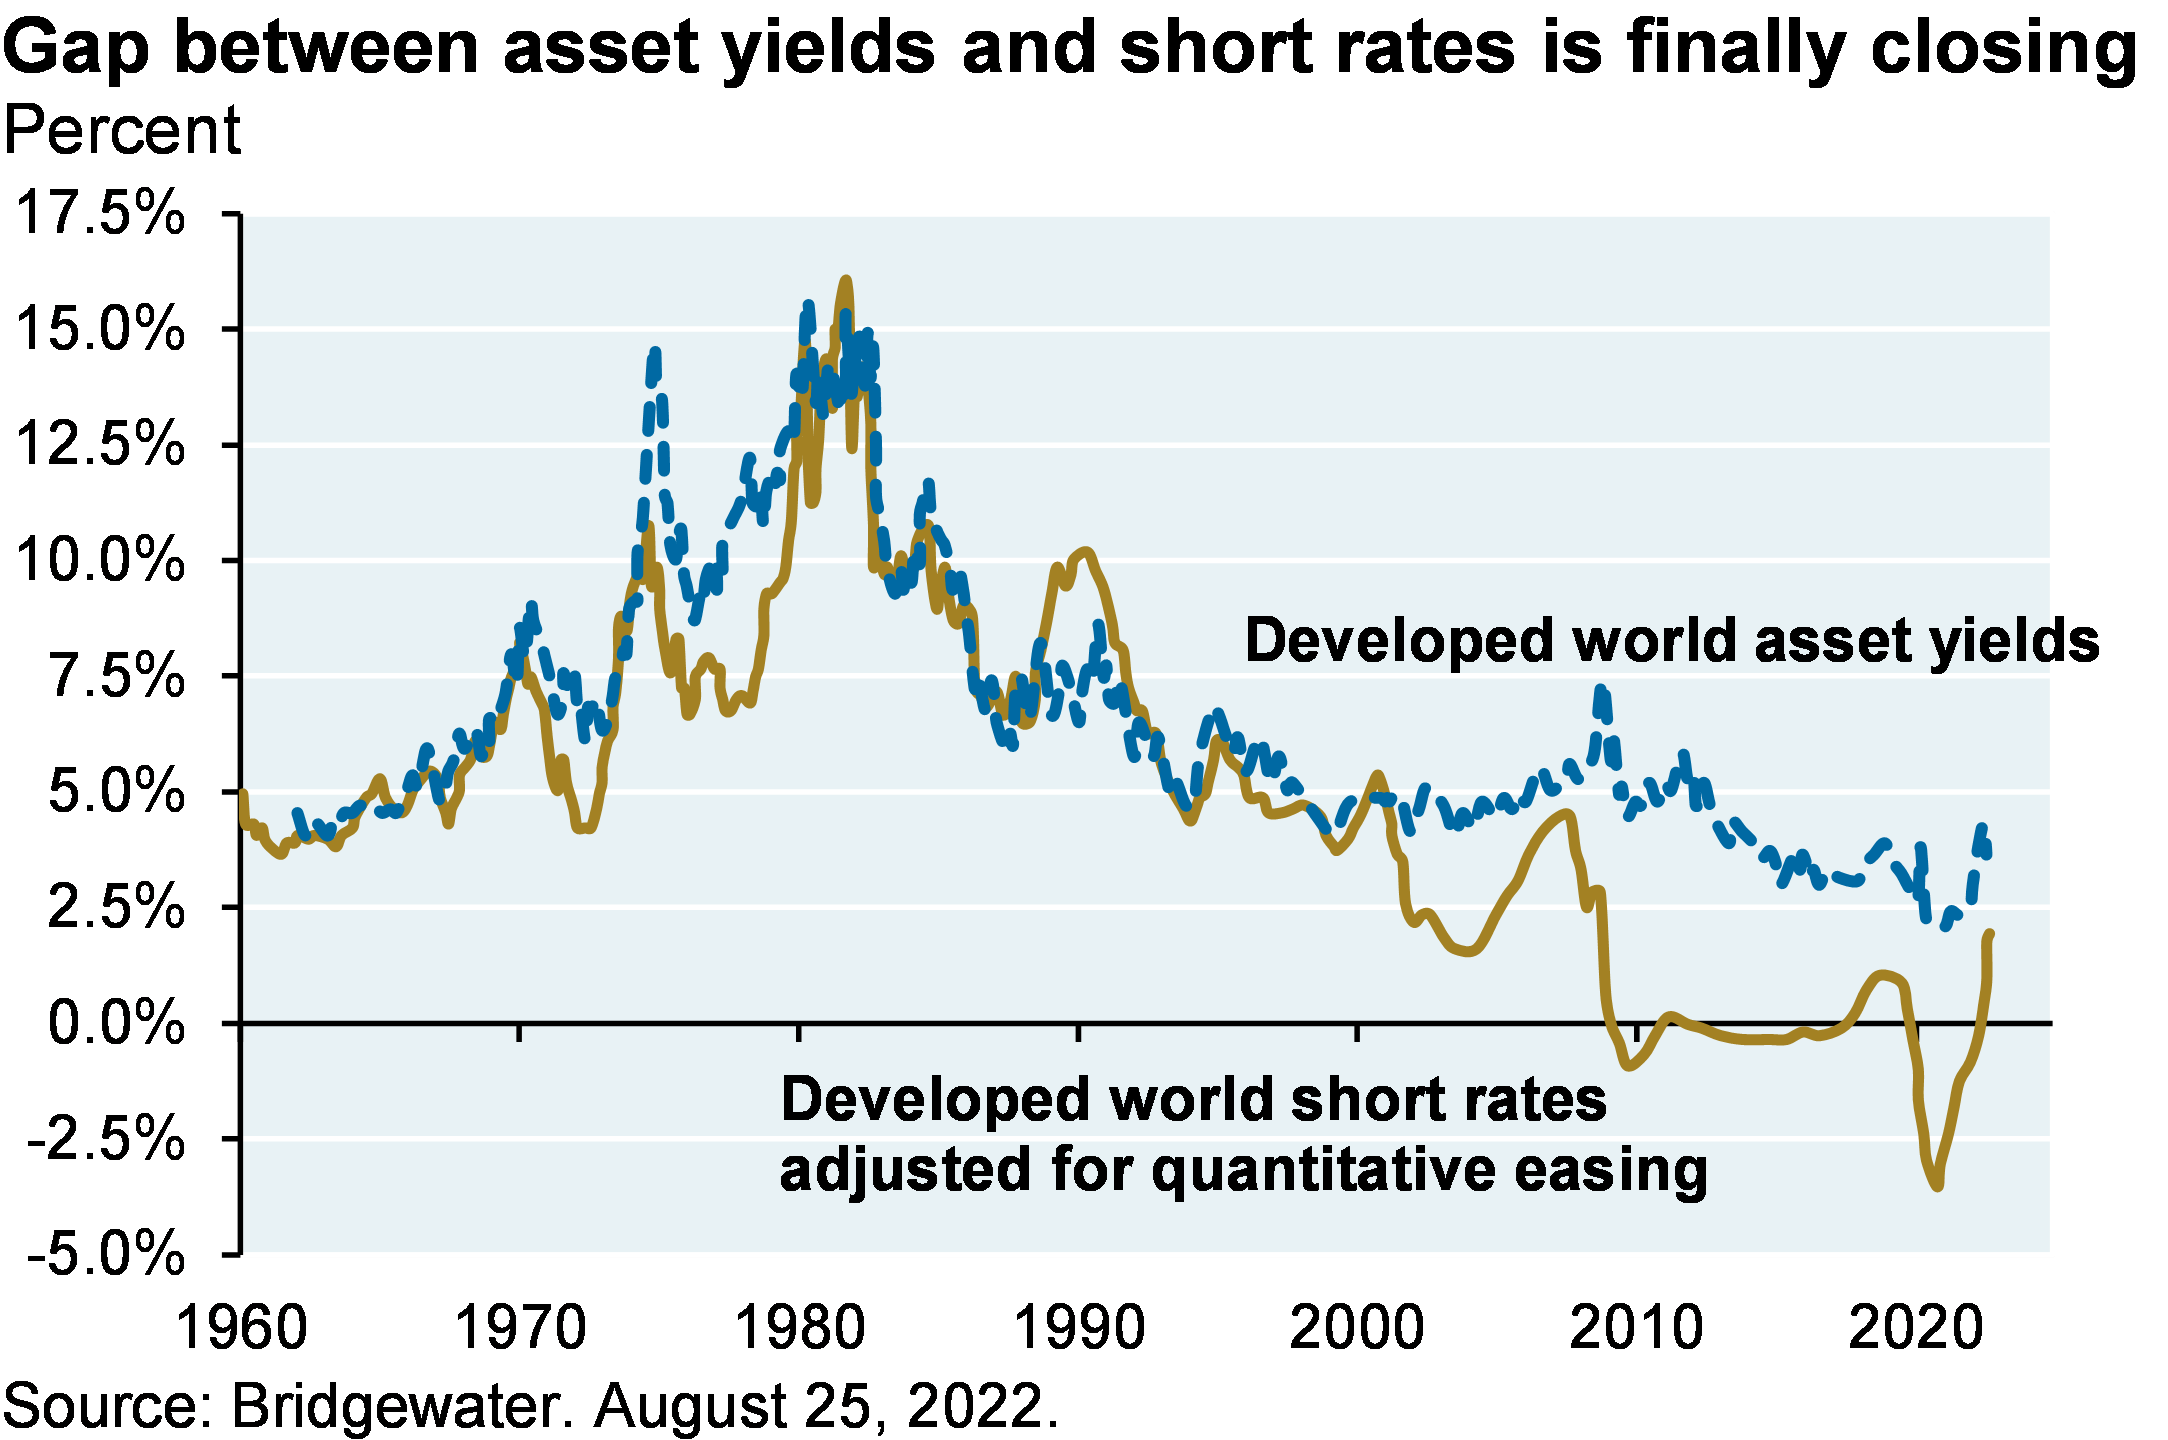 Line chart shows developed world asset yields vs developed world short interest rates which were very similar from 1960 to 2009. Since 2009, short rates have been below asset yields, but that gap is closing.